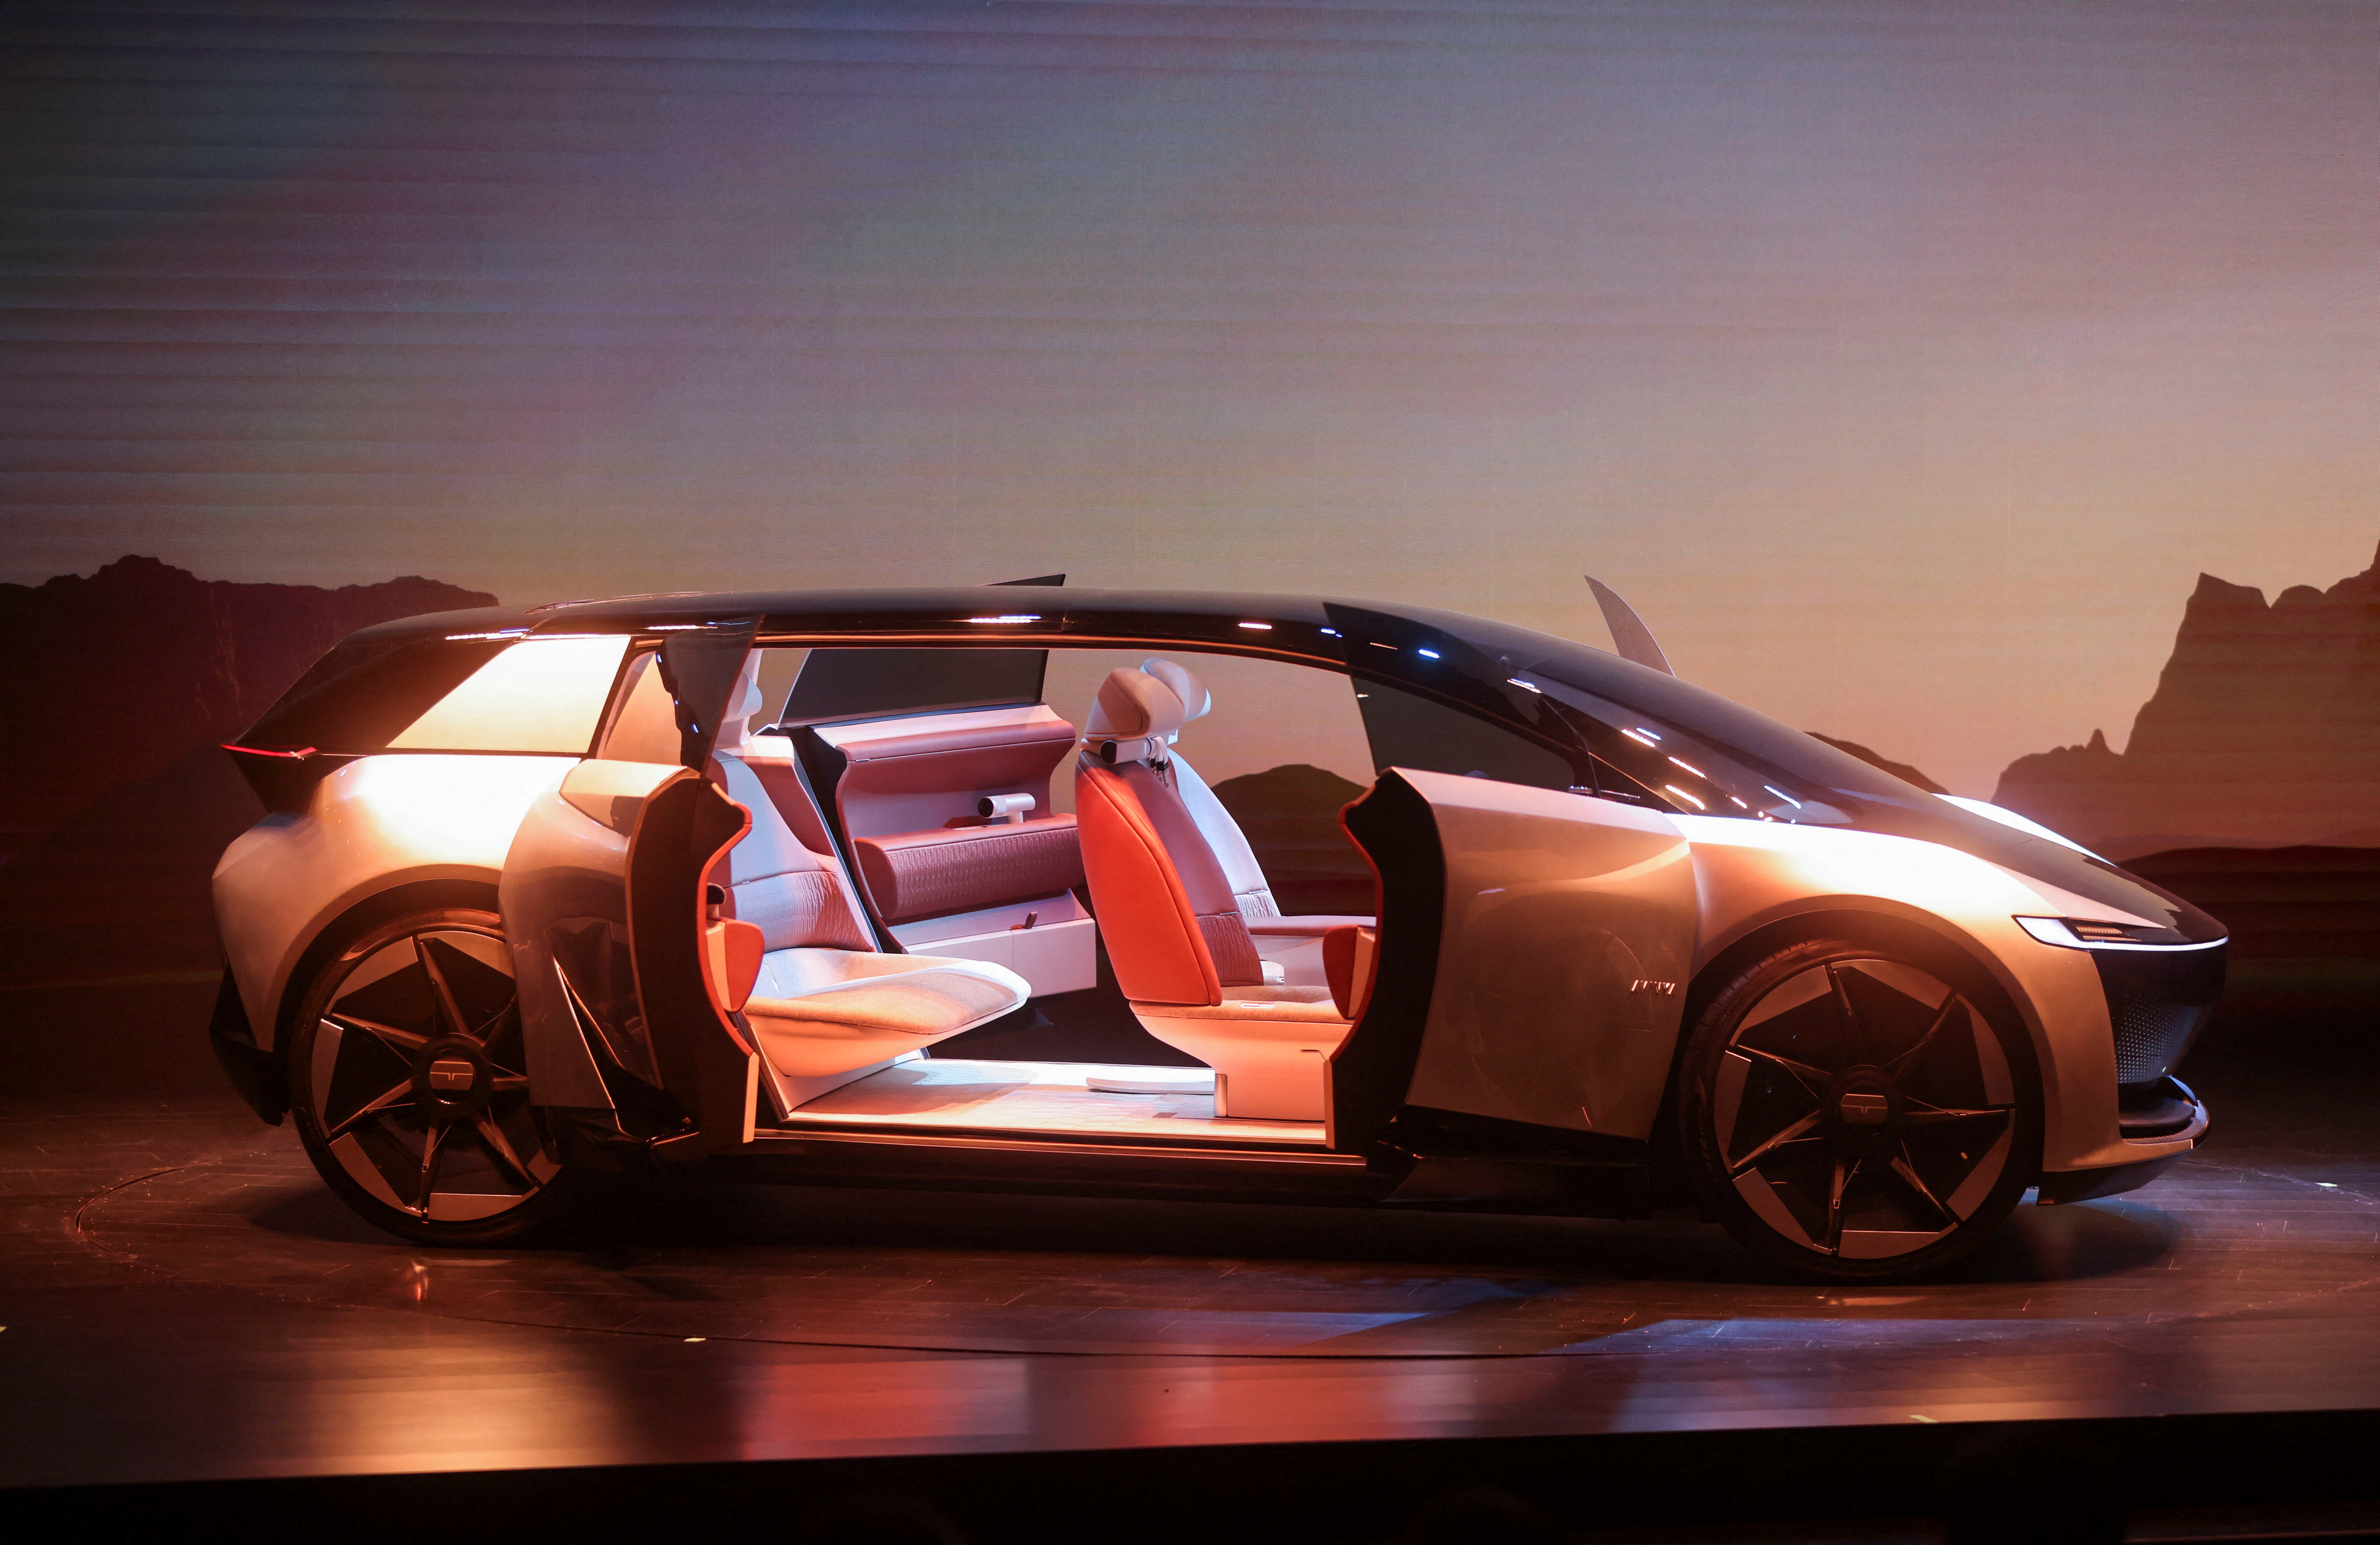 The Tata Avinya concept car is unveiled during a global launch event in Mumbai